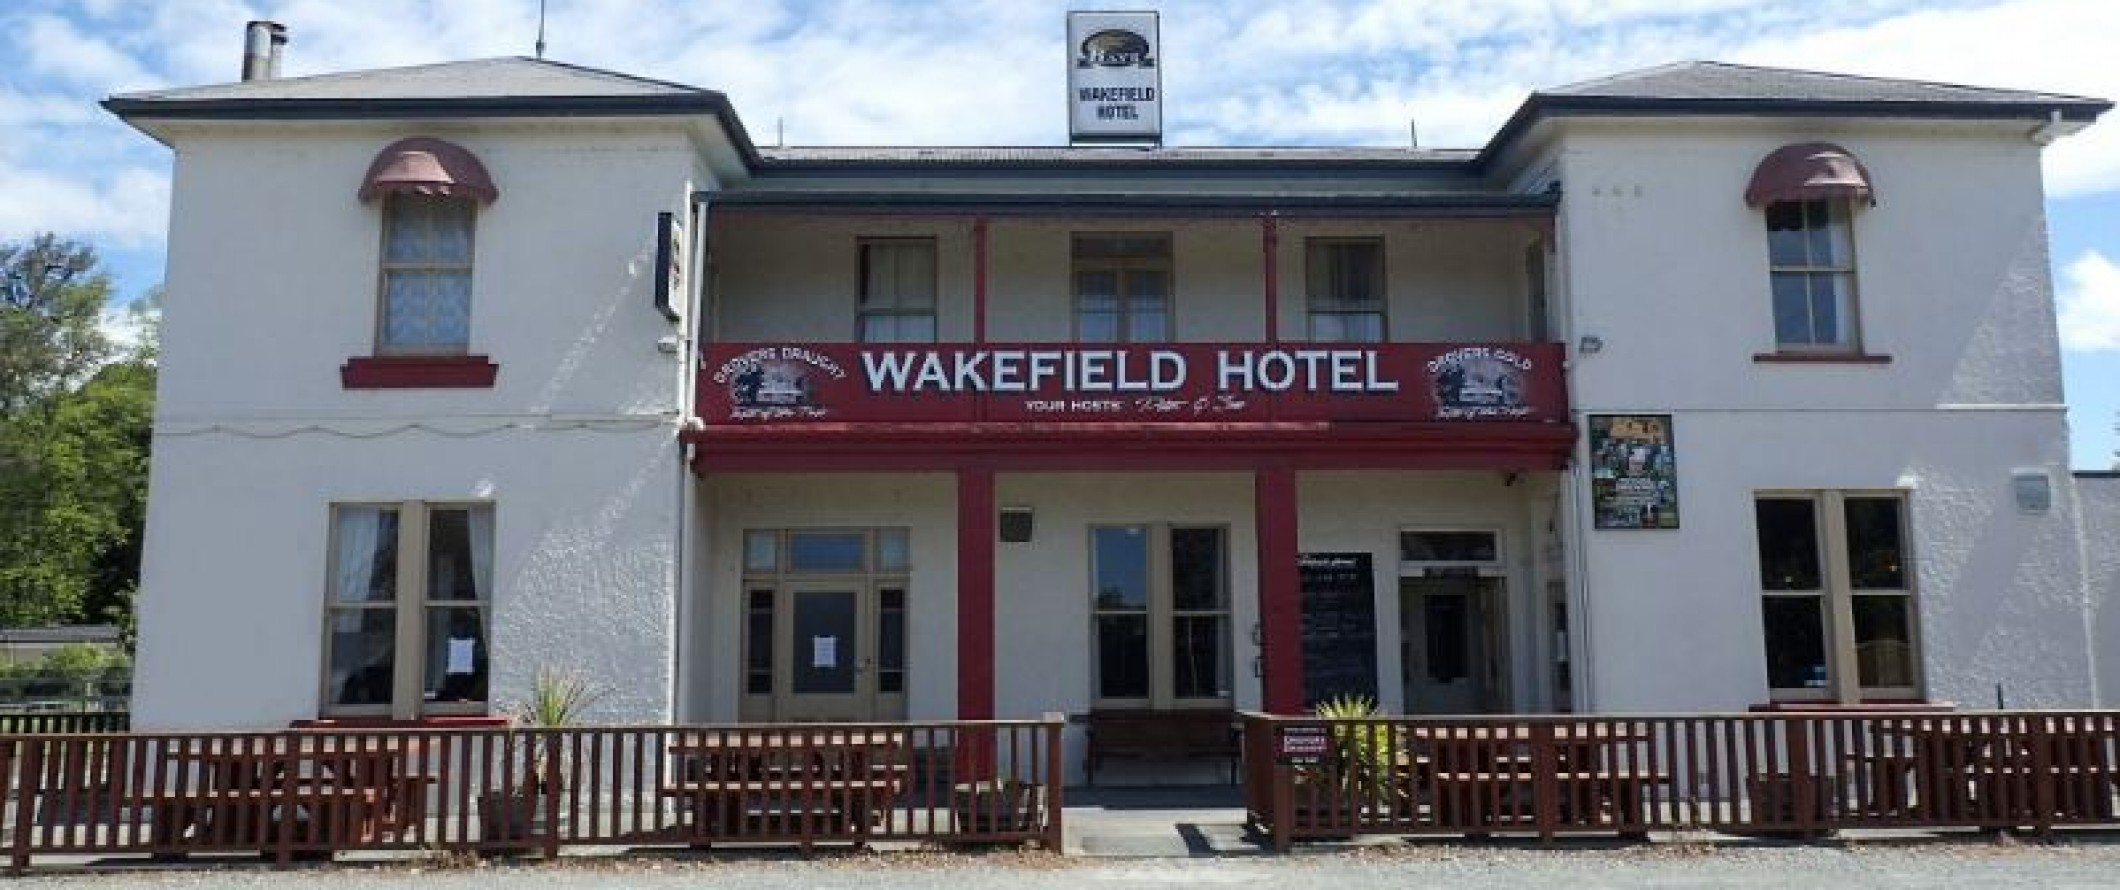 The Wakefield Hotel Banner